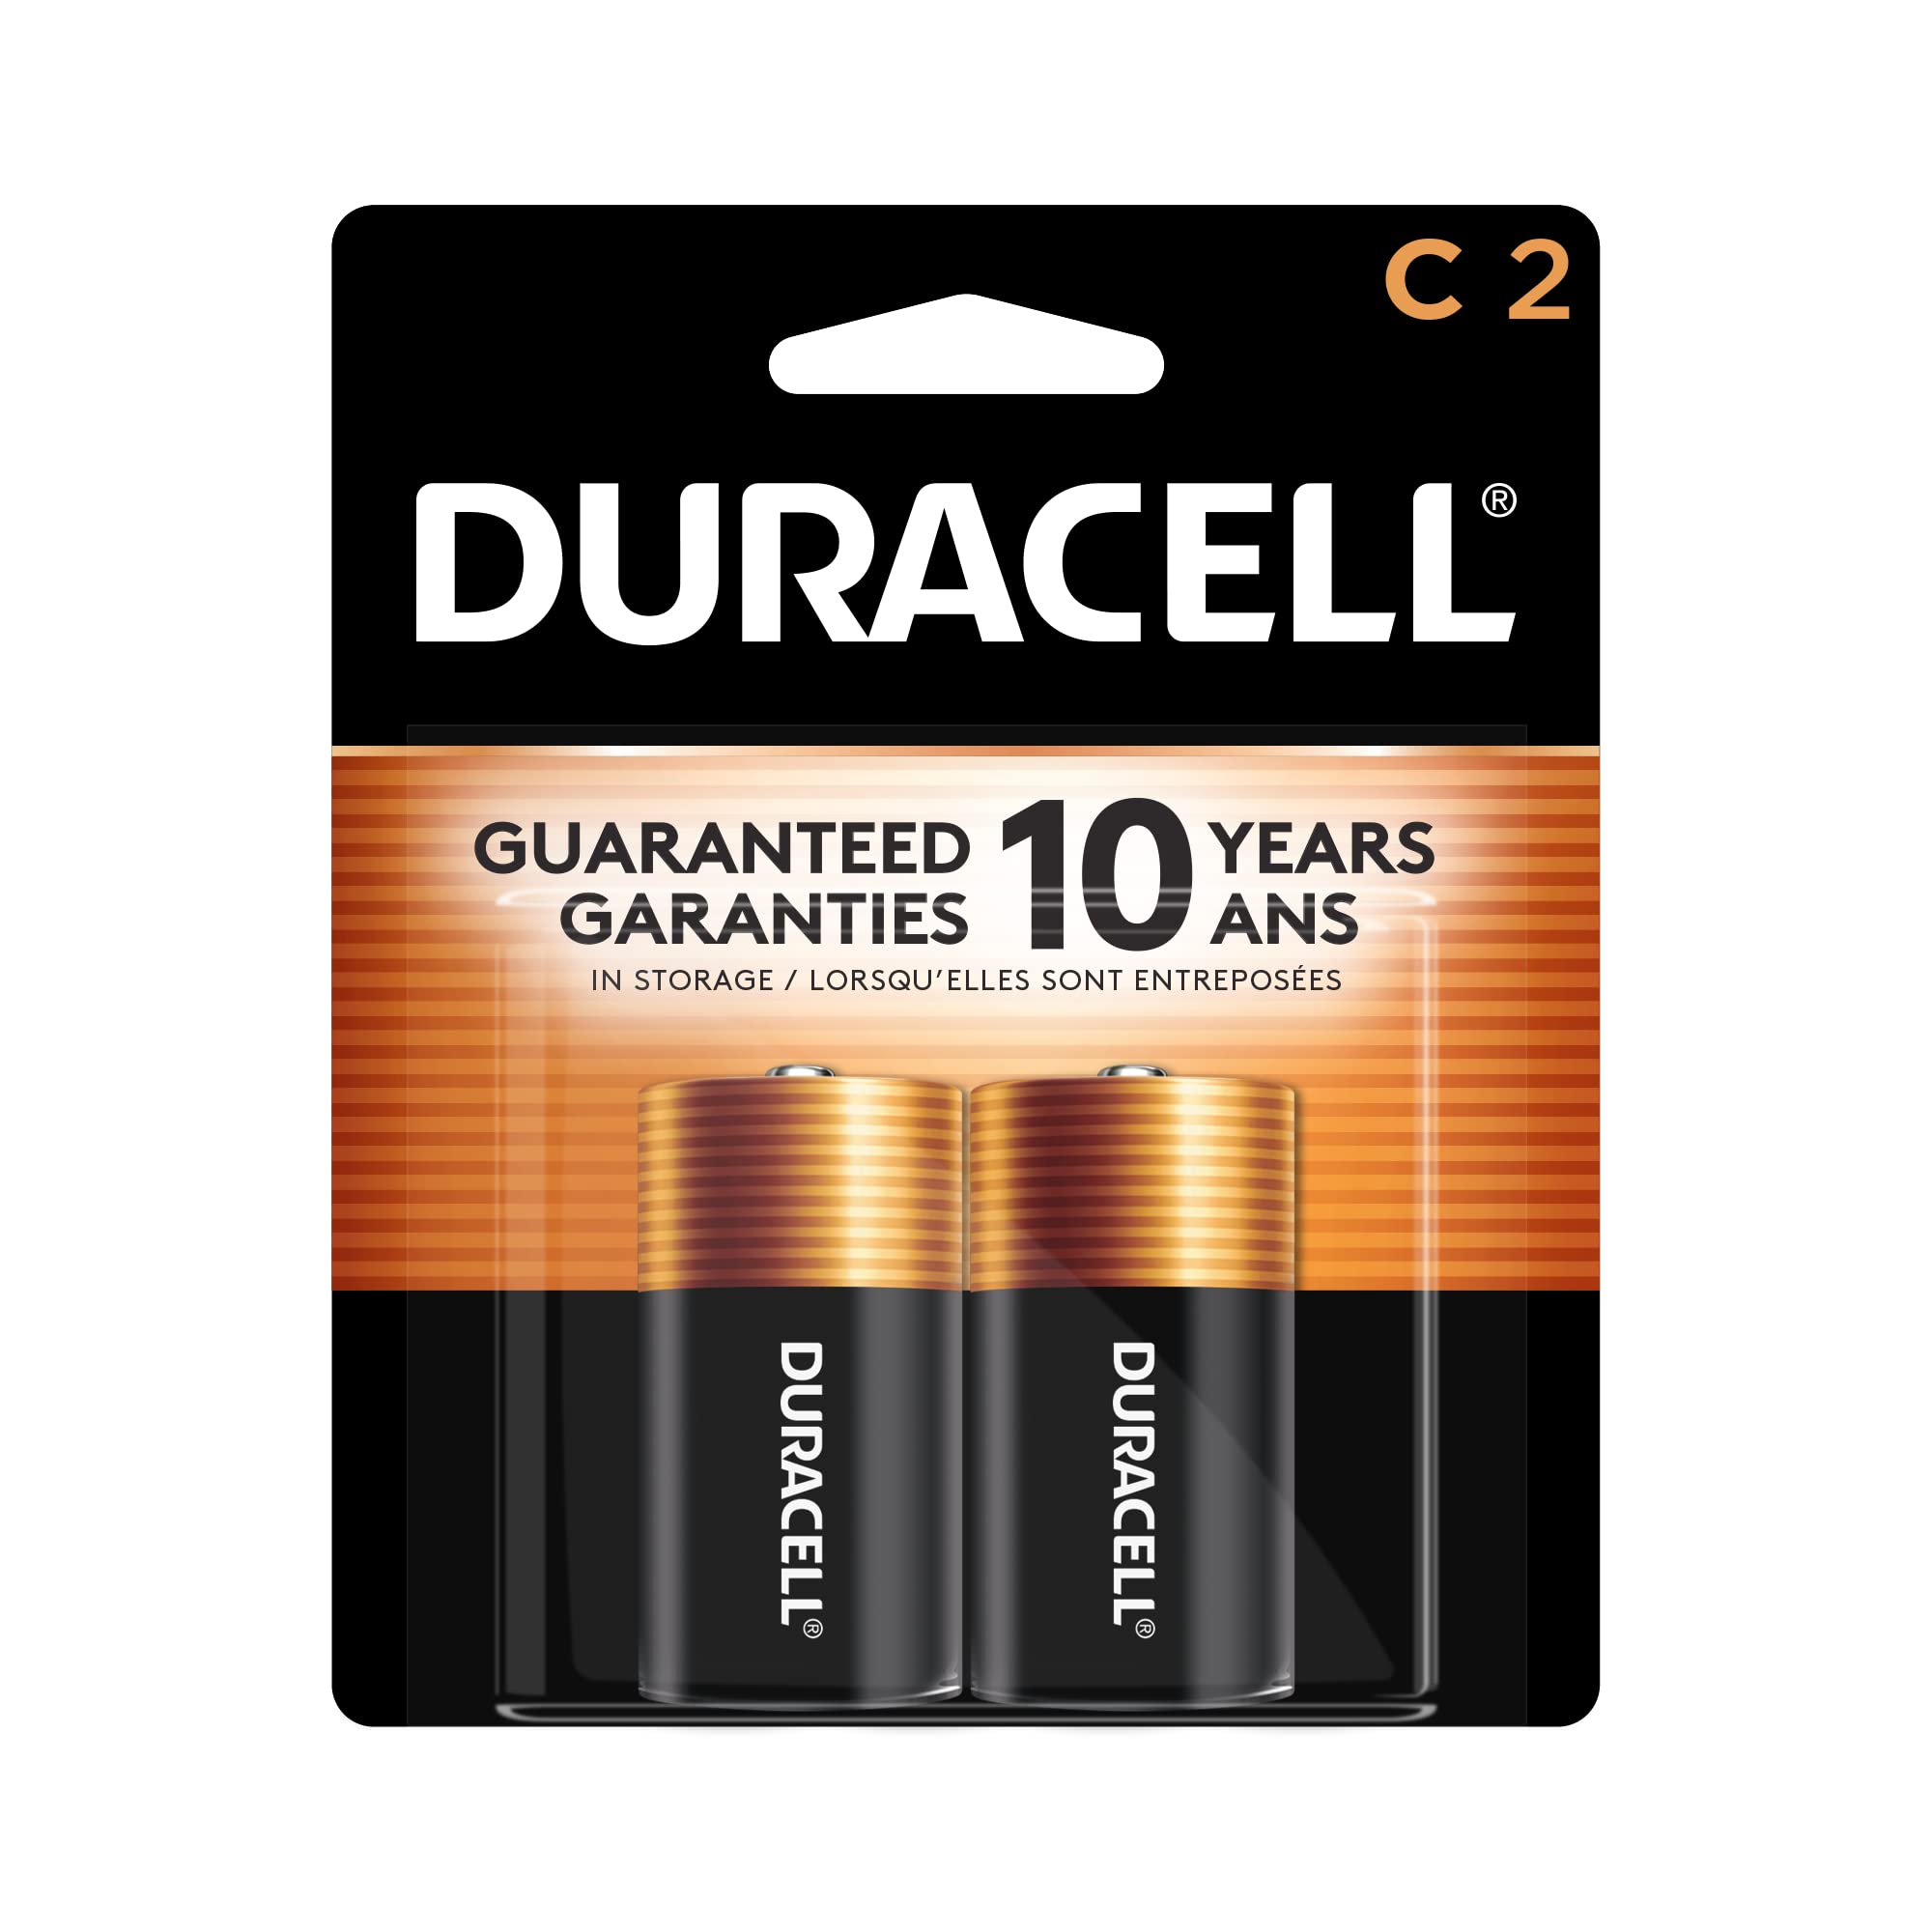 DURACELL Coppertop 1.5V Size C Alkaline Battery, (Pack of 3) - image 1 of 5